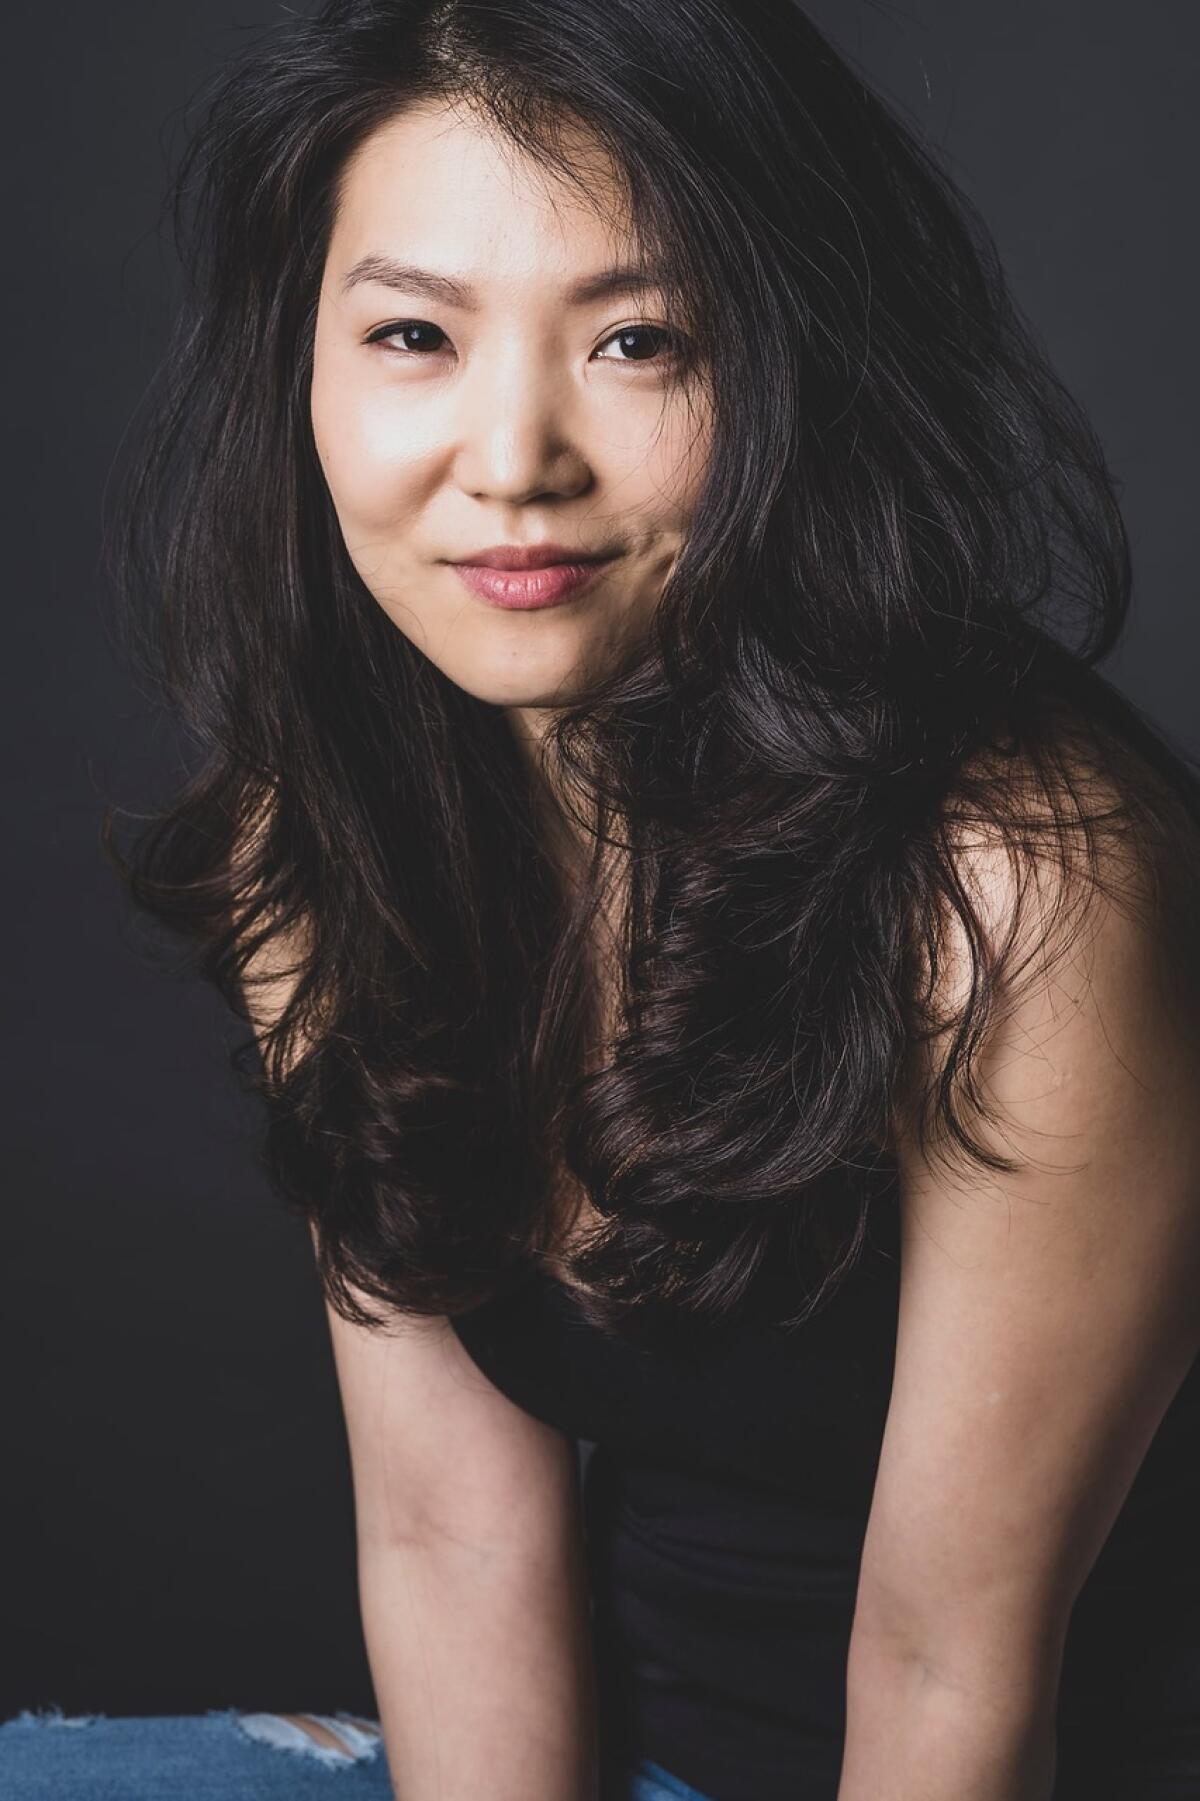 Local concert pianist Jeeyoon Kim has written her first book, intending to help others be successful in life.